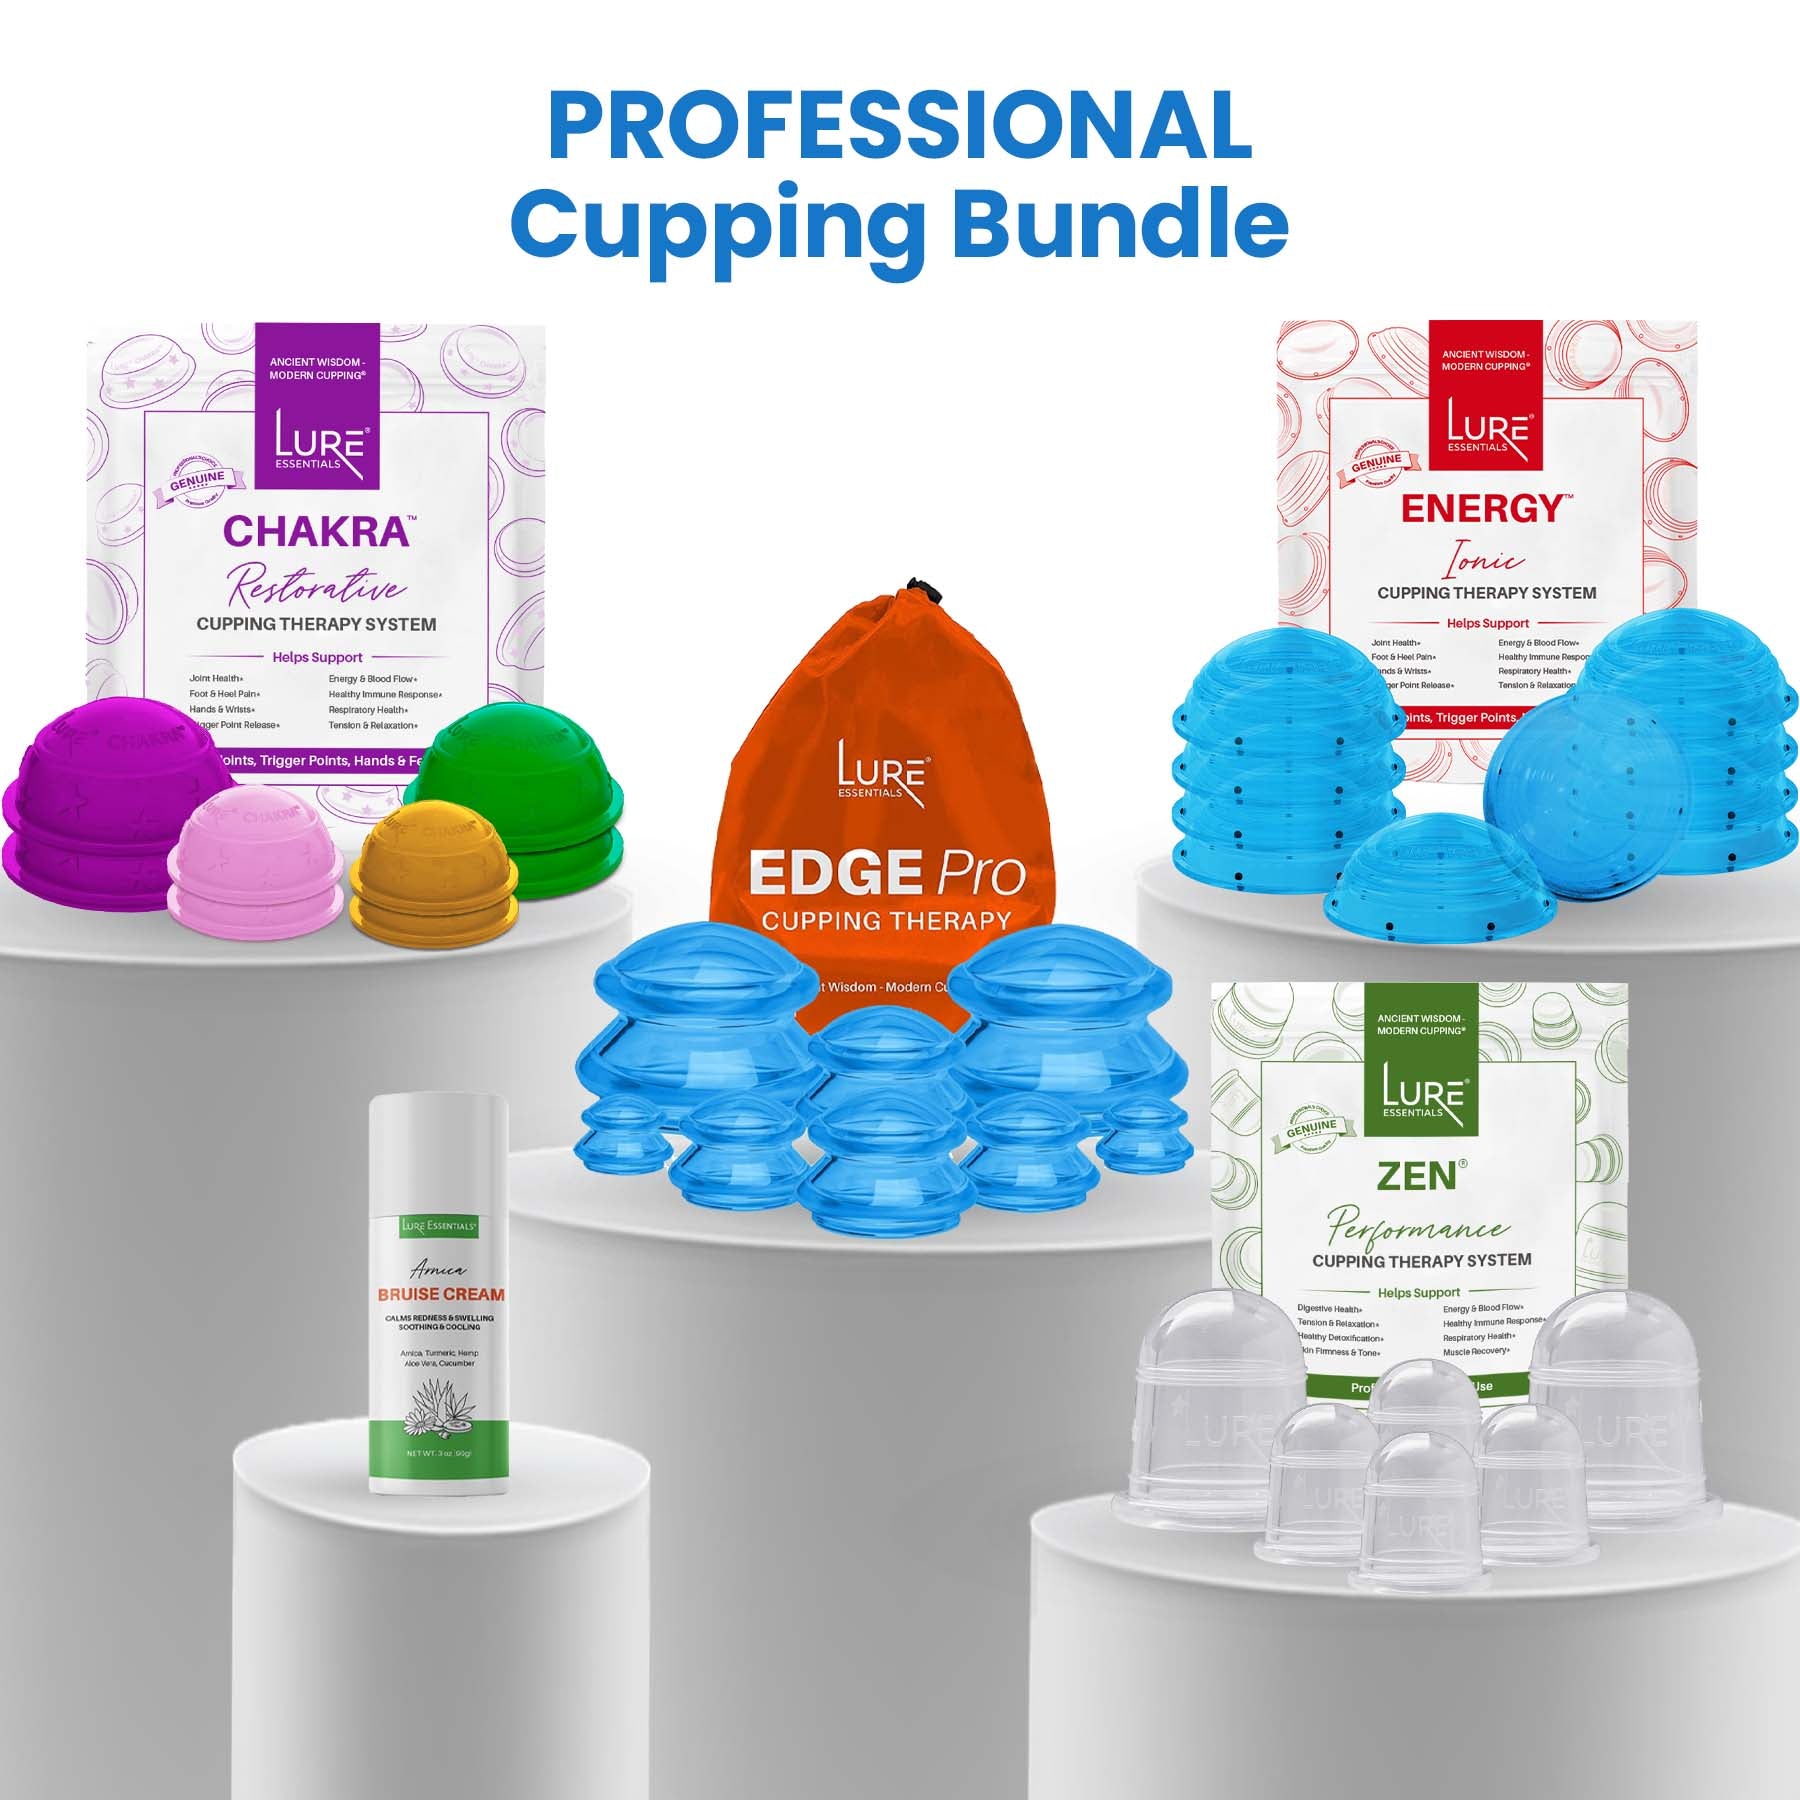 The PROFESSIONAL Cupping Therapy Bundle